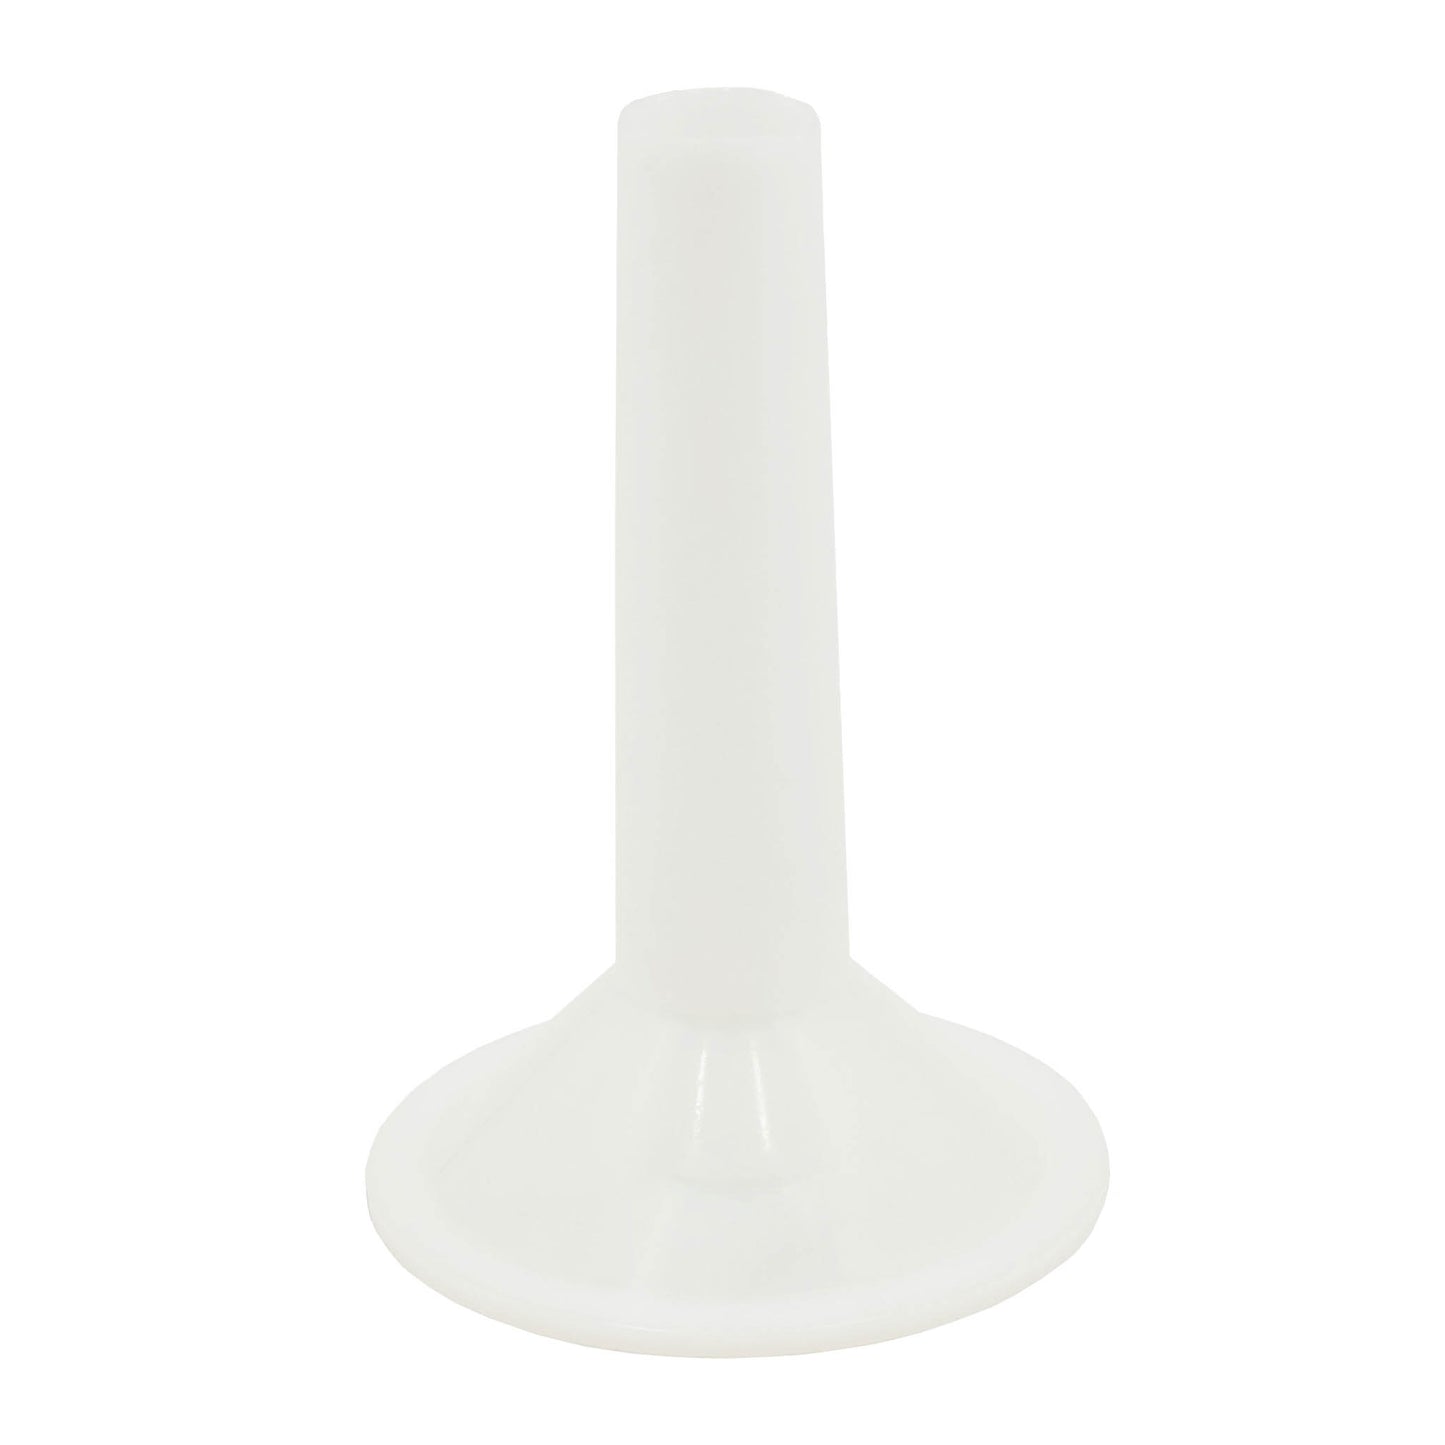 white food grade plastic salami and sausage mincer funnel for size 32 mincers 15mm in diameter.